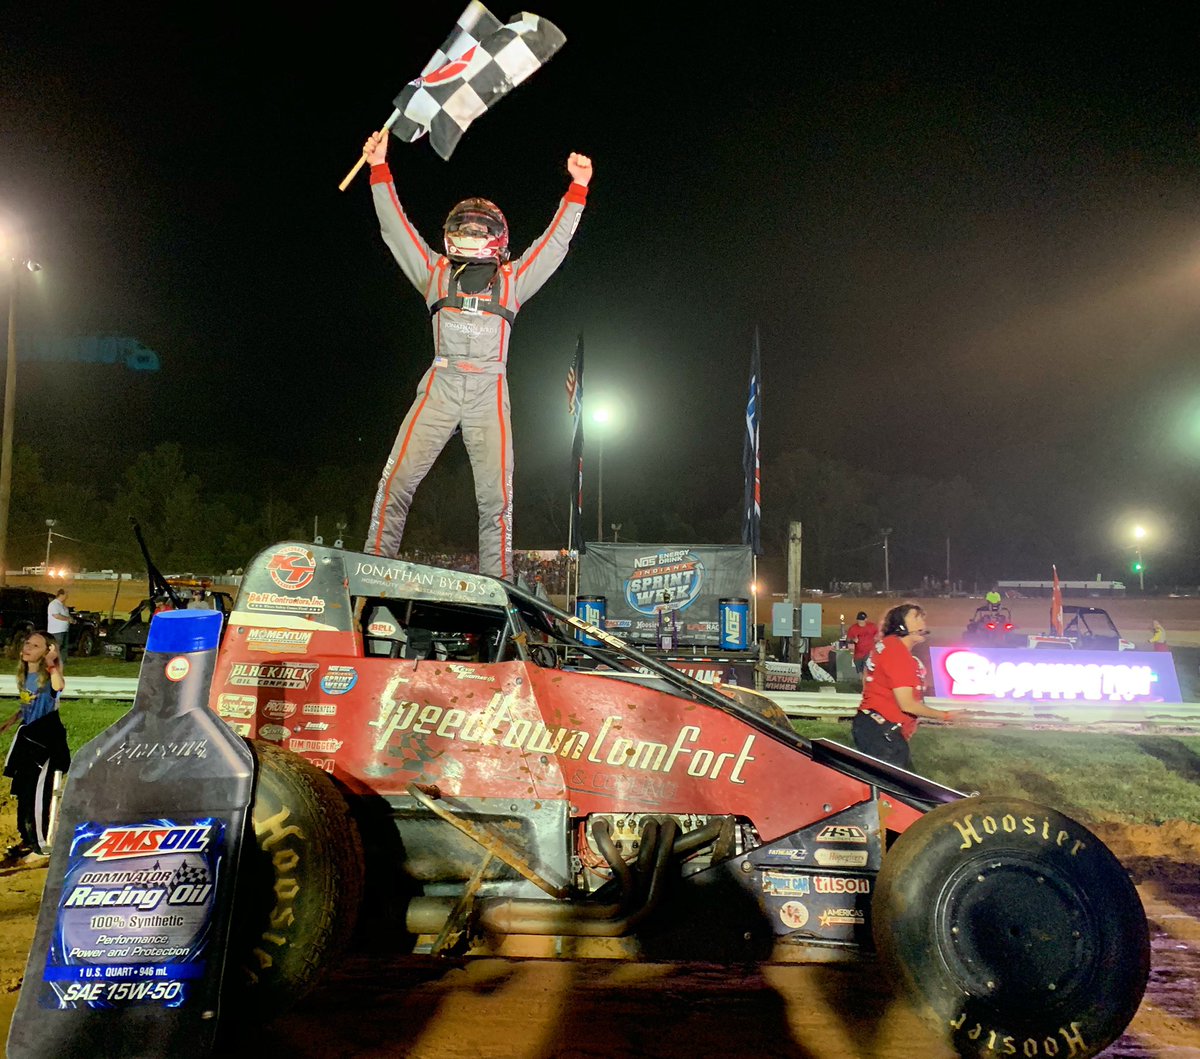 KTJ picked up a thriller tonight at Bloomington after trading positions with Jason McDougal and Kyle Cummins! #ISW19